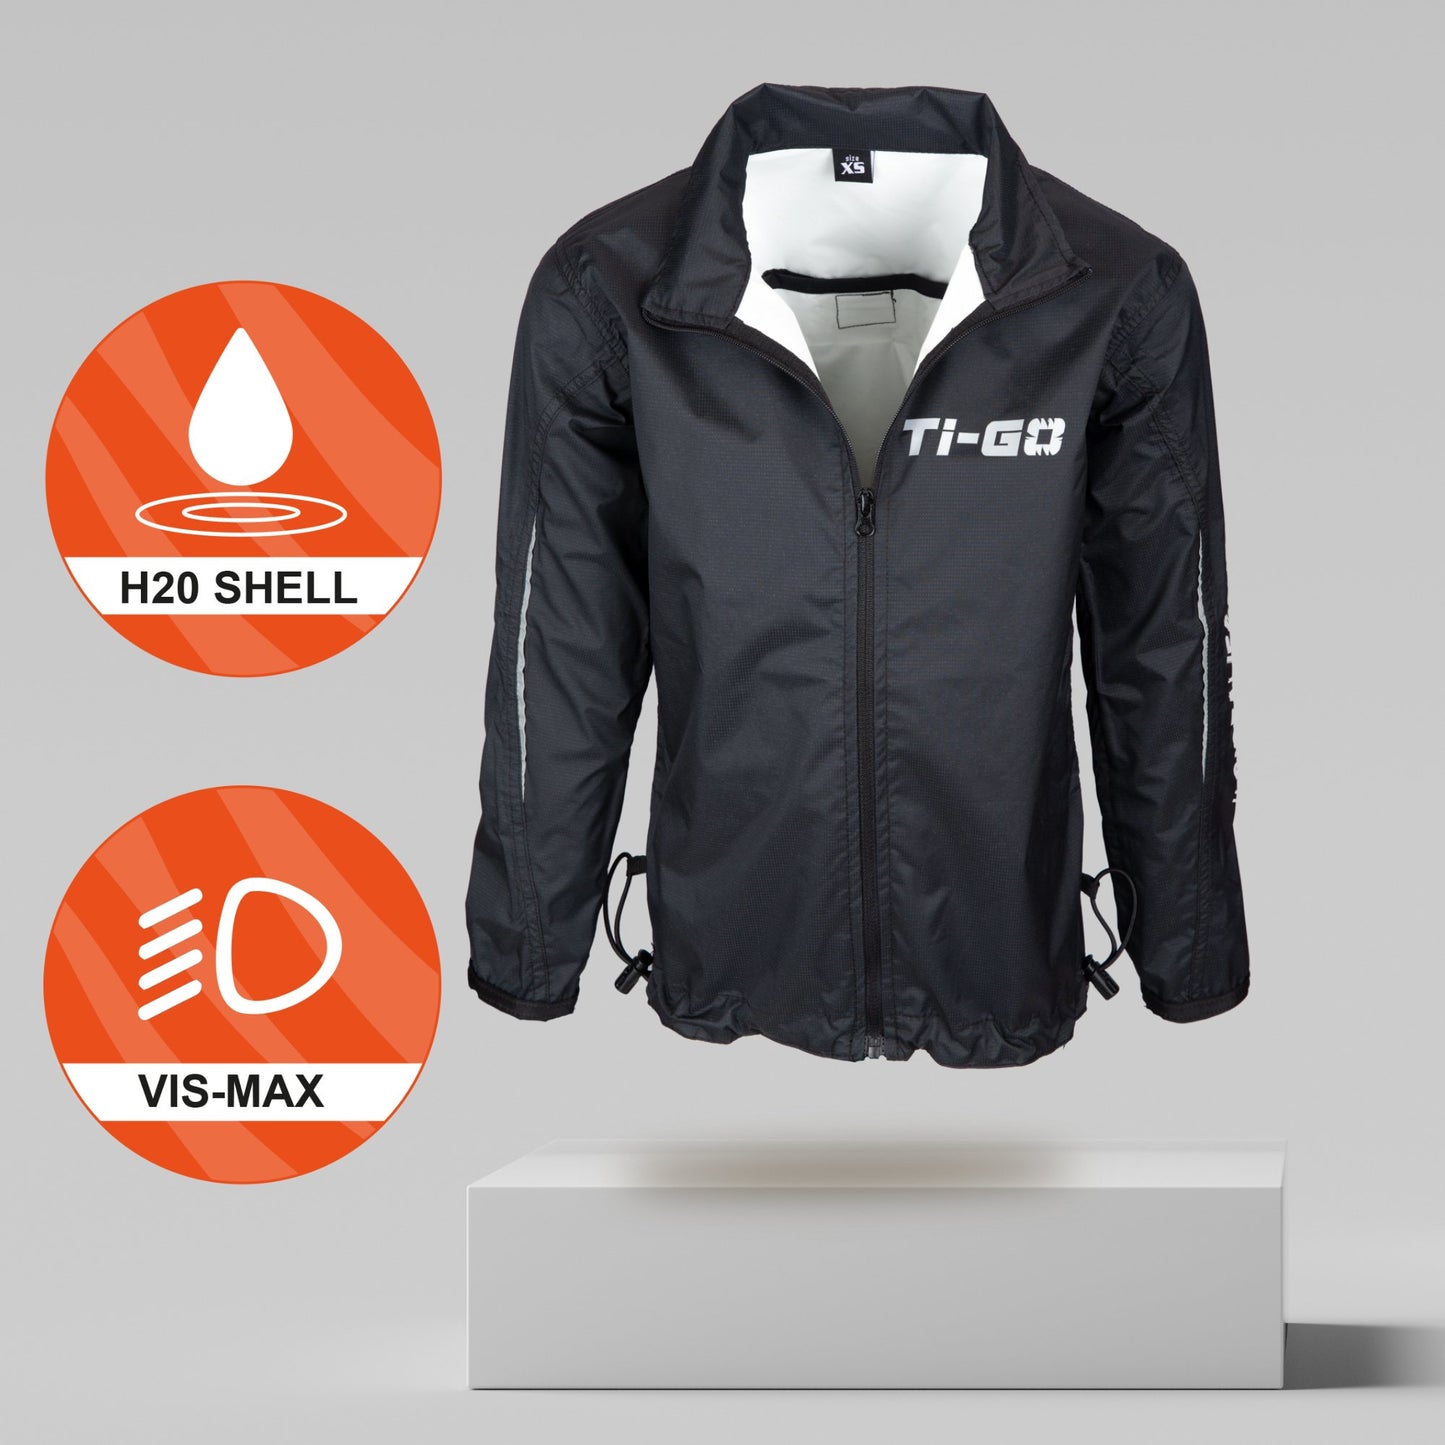 Ti-GO 'Totes Dry' Kids Cycling Jacket 2.0